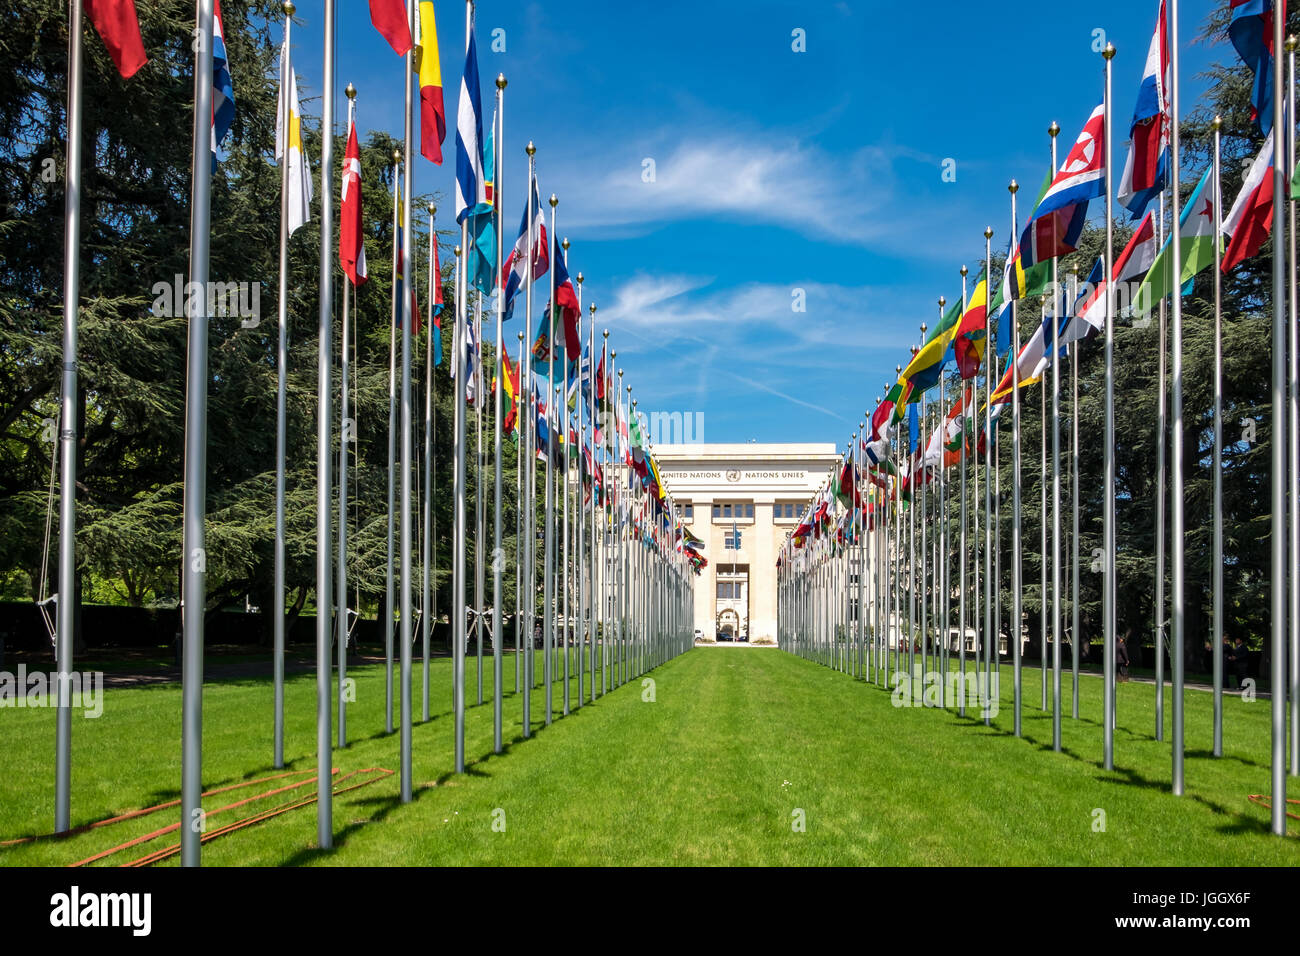 Flagpoles in front of United Nations, UN, Palais des Nations, Geneva, Switzerland, Europe Stock Photo